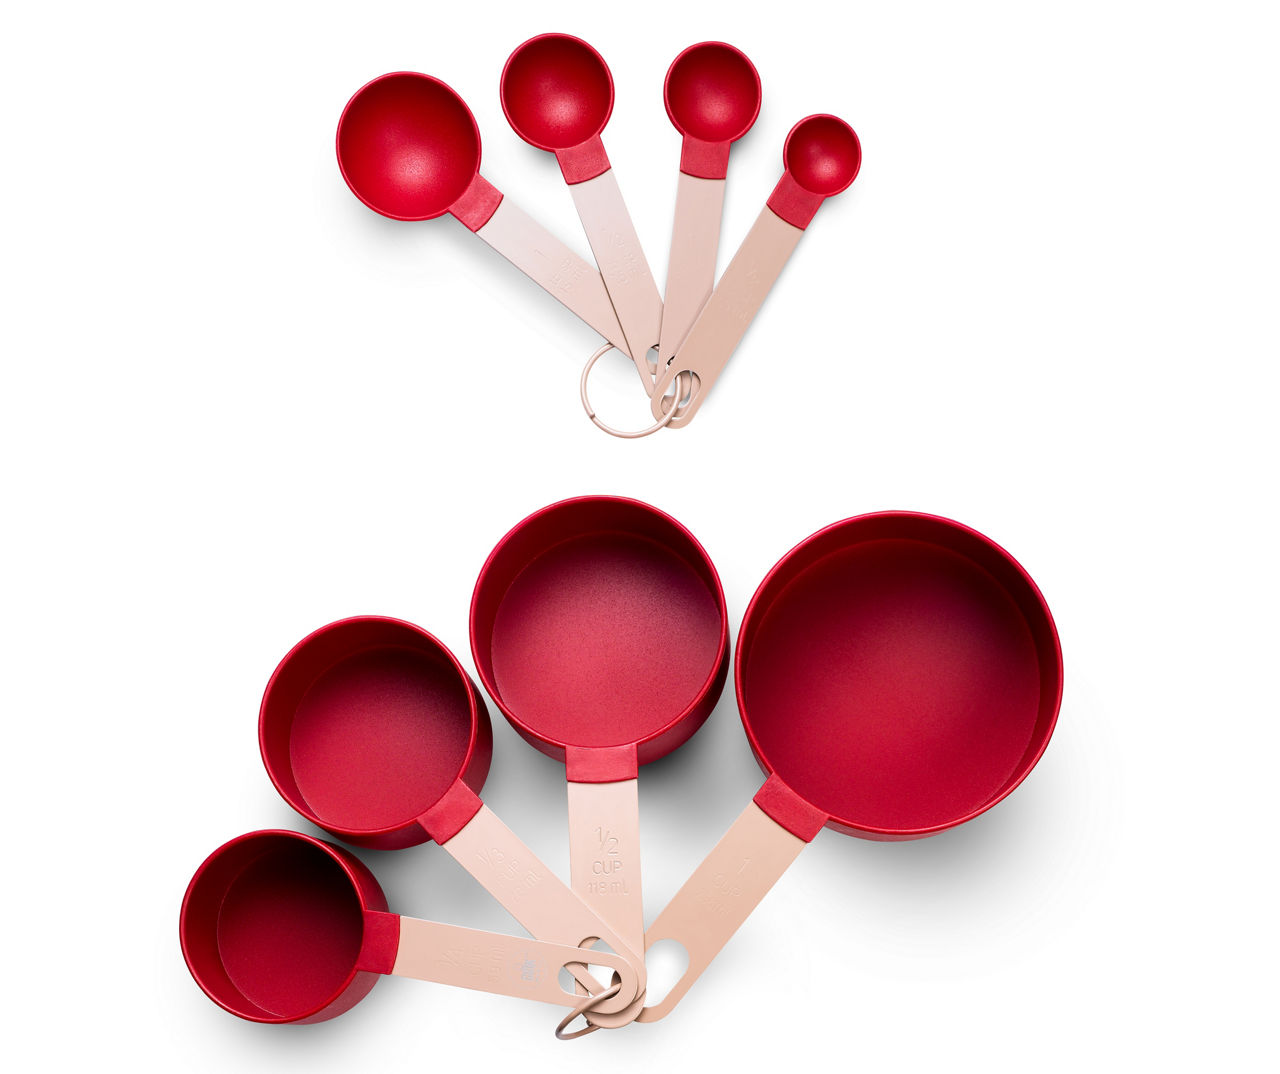 CWC Cook With Color 8pc Measuring Spoons/Cups Red Stainless Steel NEW 